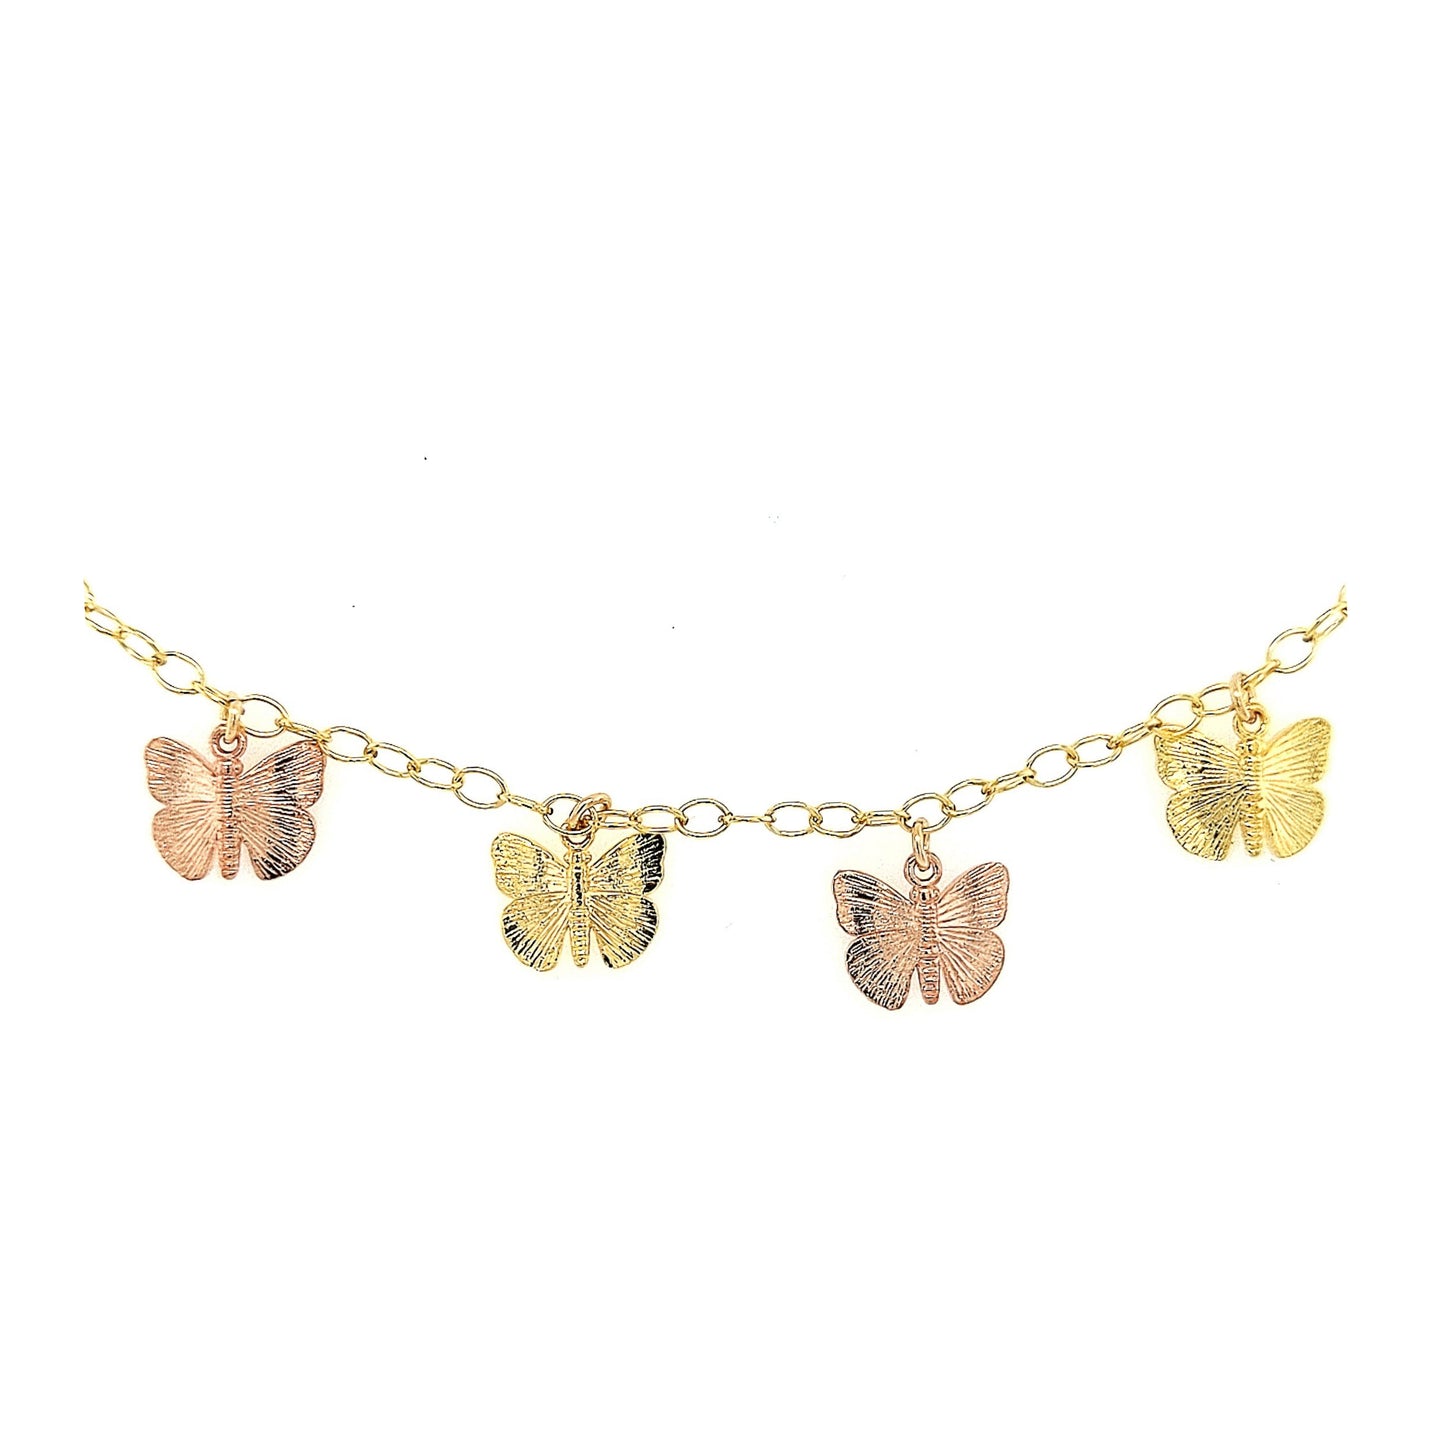 Gold Filled Chain With Hanging Gold and Rose Gold Butterflies Bracelet - HK Jewels